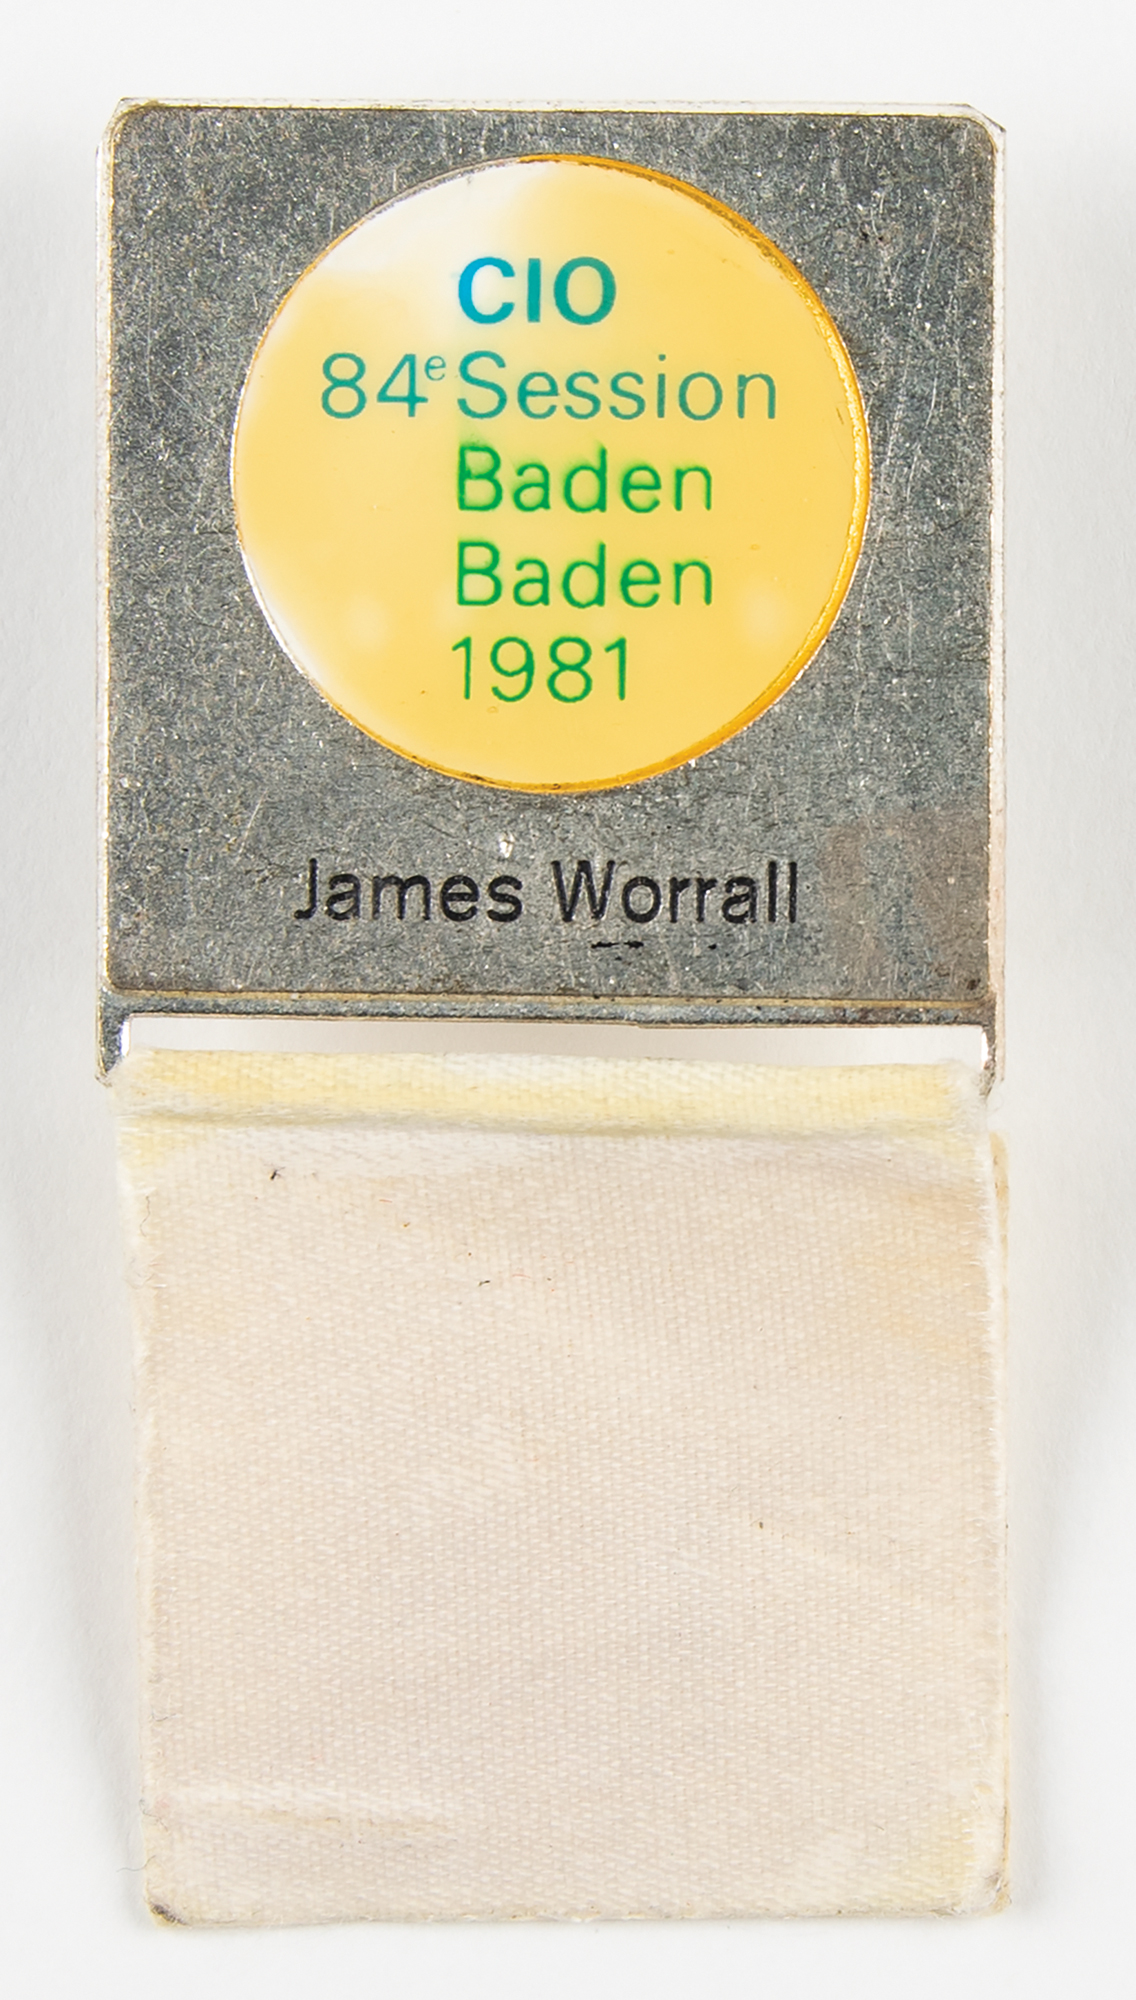 Lot #4145 84th IOC Session in Baden-Baden, 1981. IOC Member's Badge for James Worrall